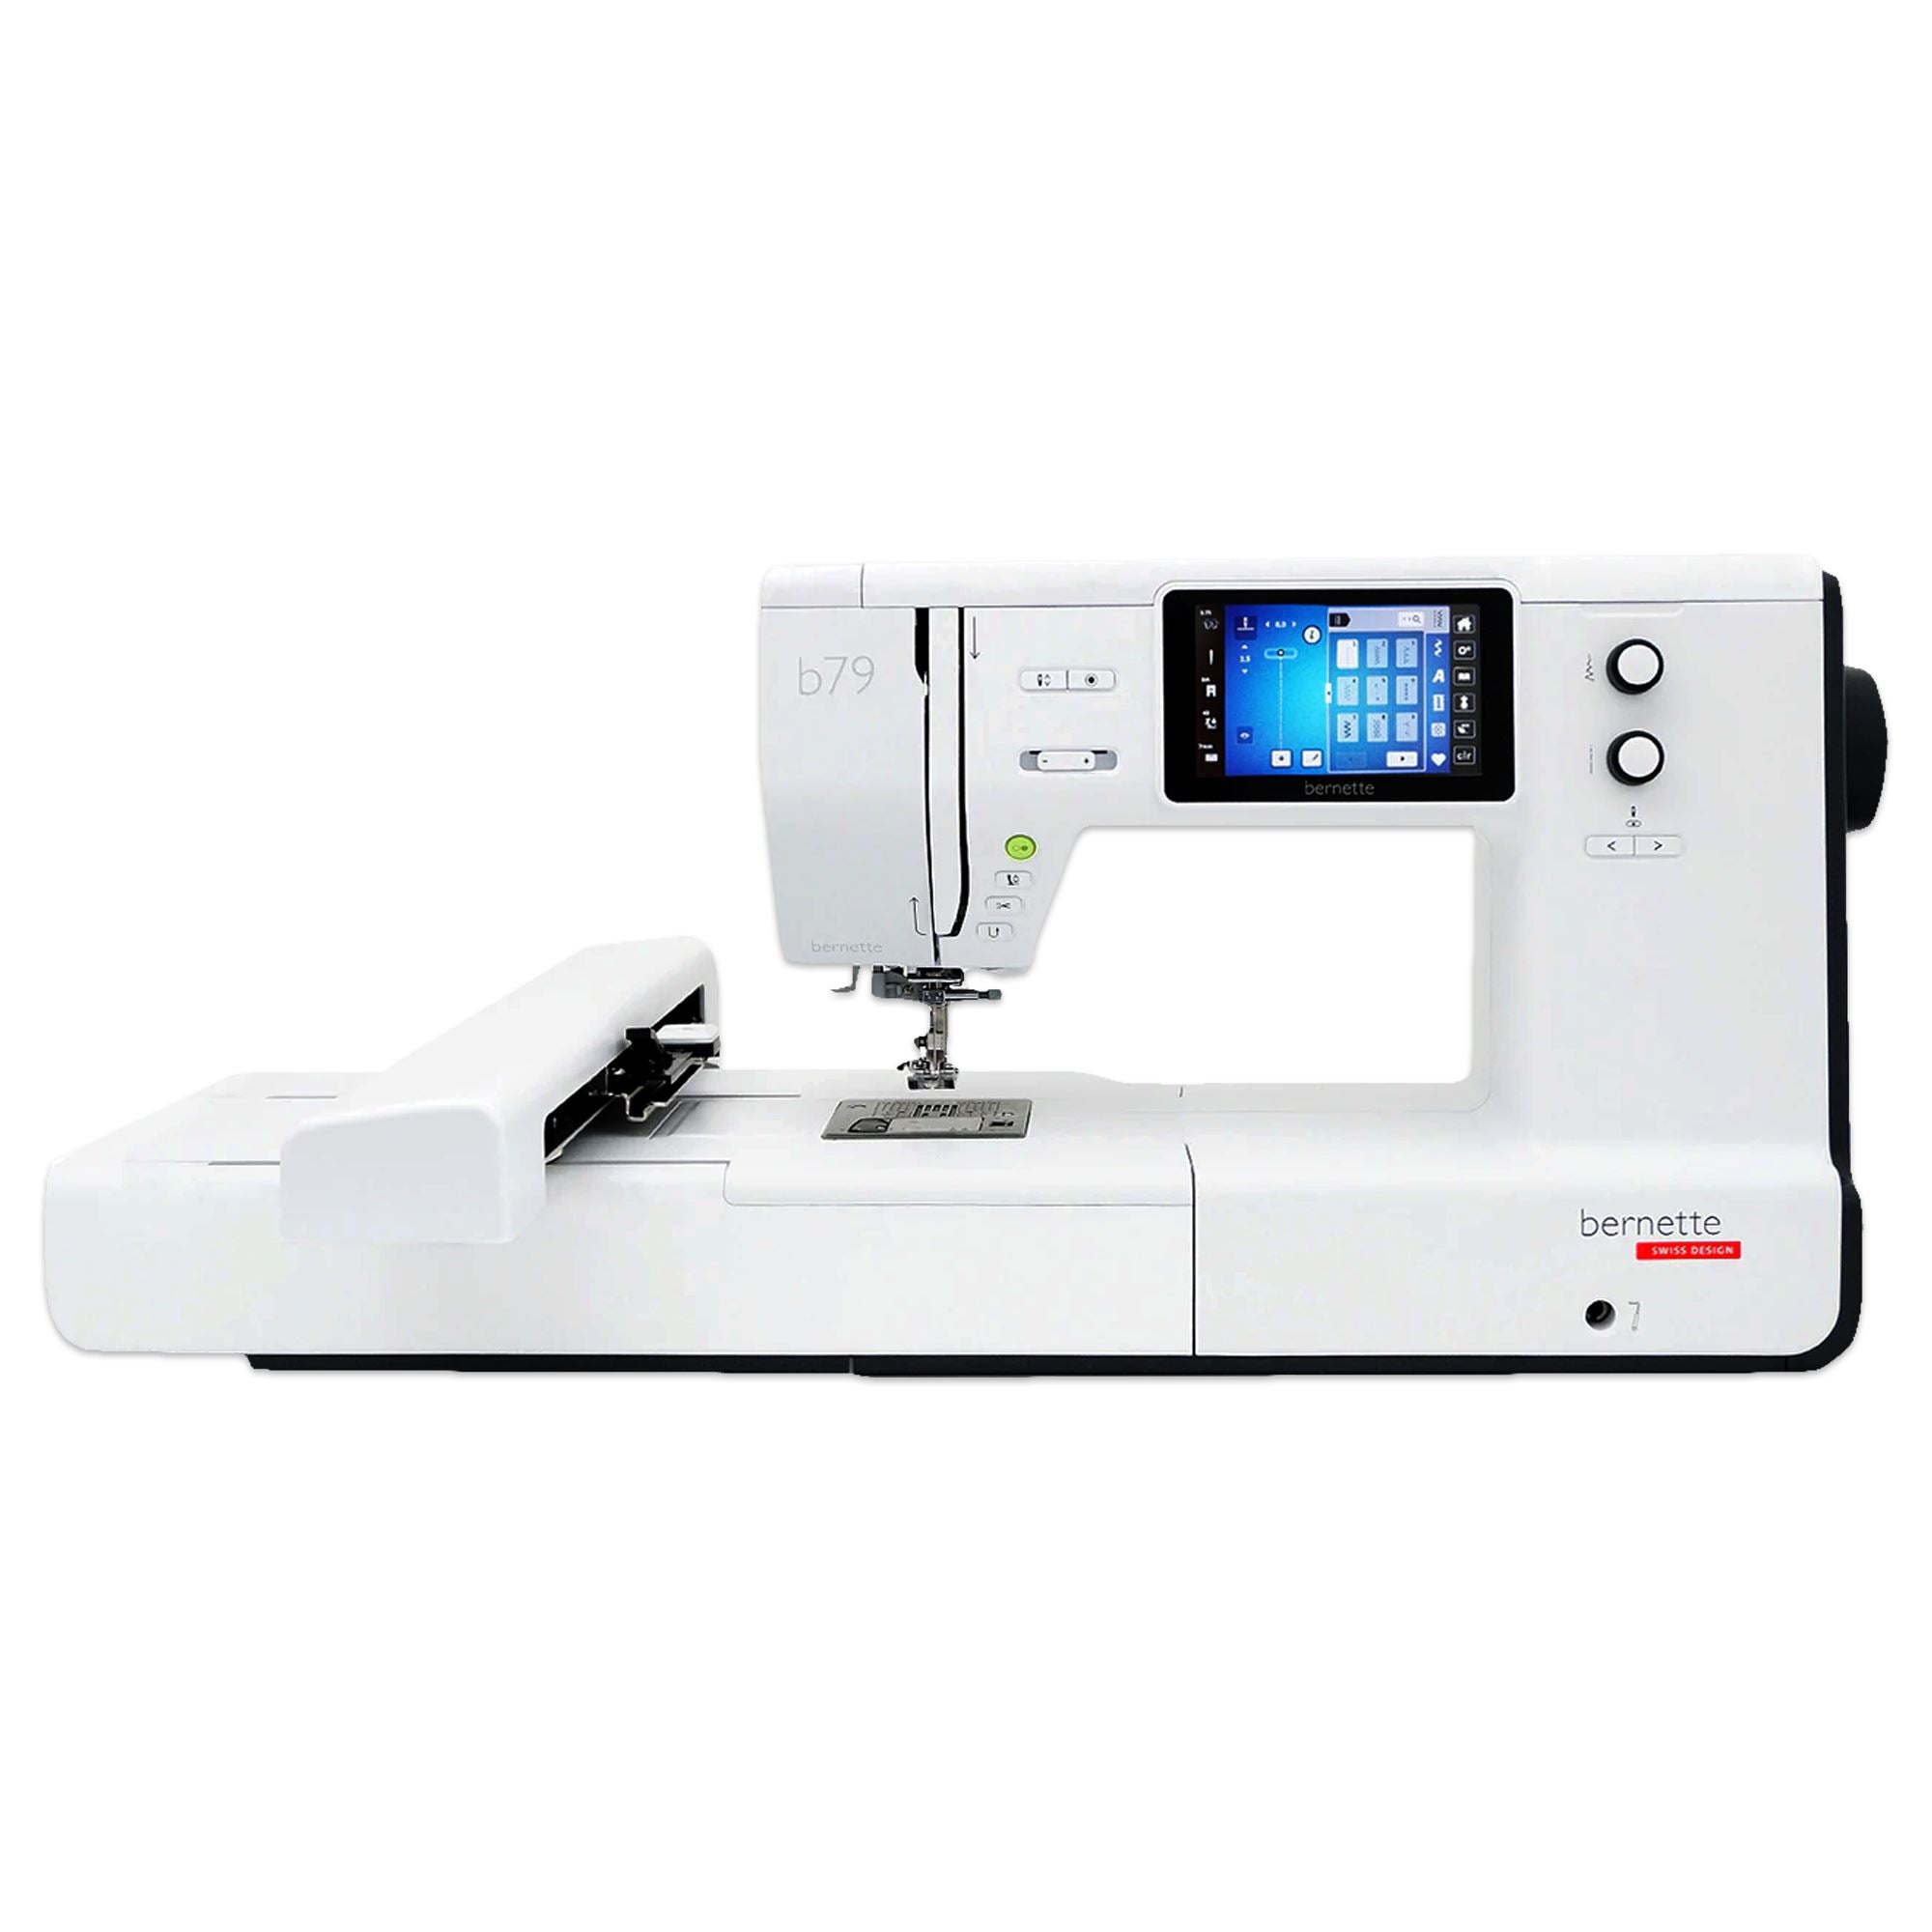 Bernette B79 Sewing & Embroidery Machine Bundle with Software Package